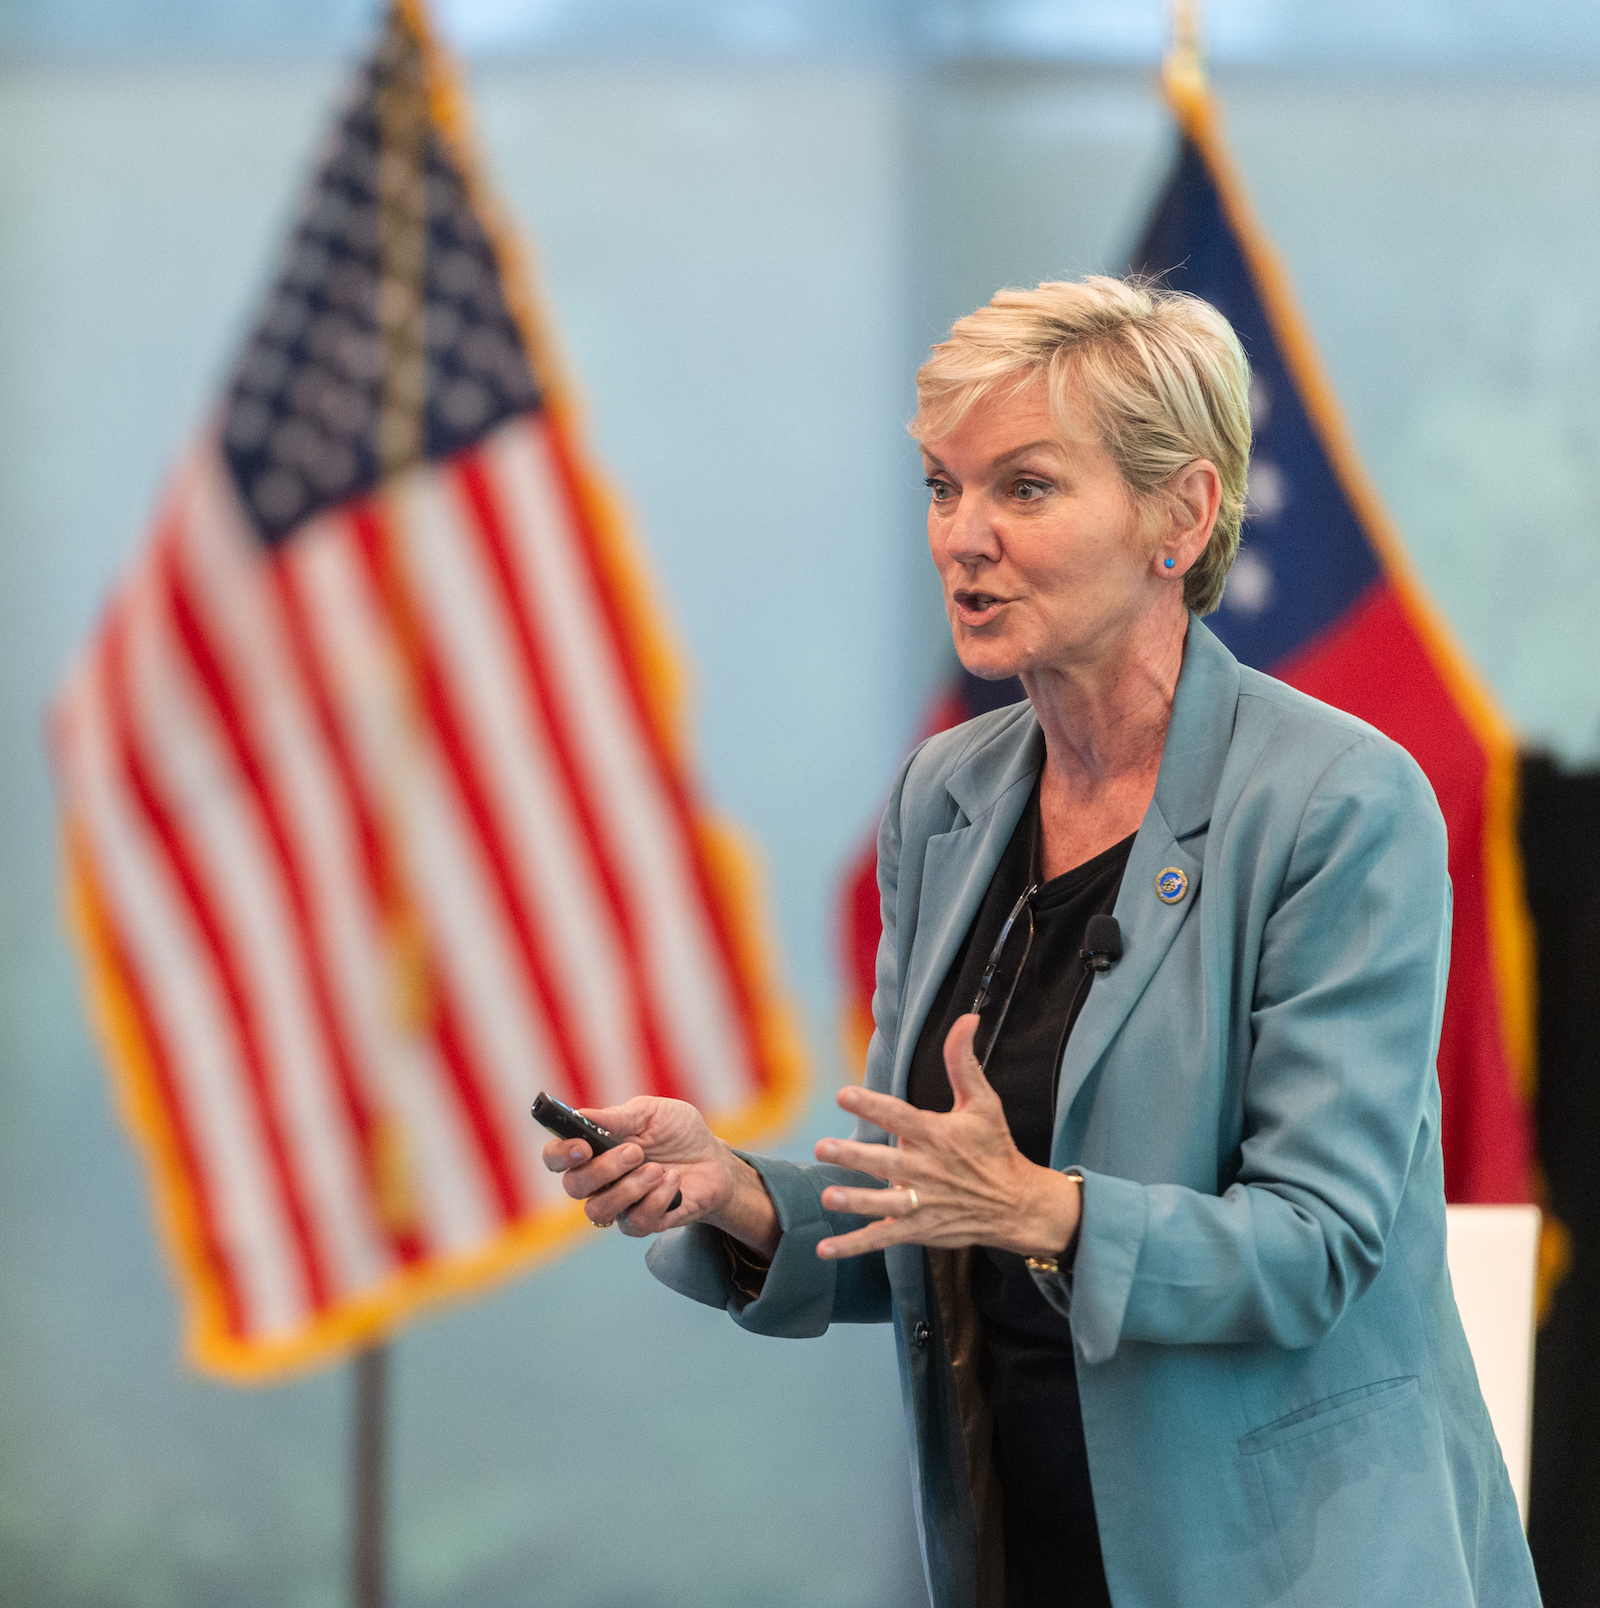 Secretary of Energy Jennifer Granholm visited Georgia Tech to talk about clean energy. (Photo by Allison Carter)